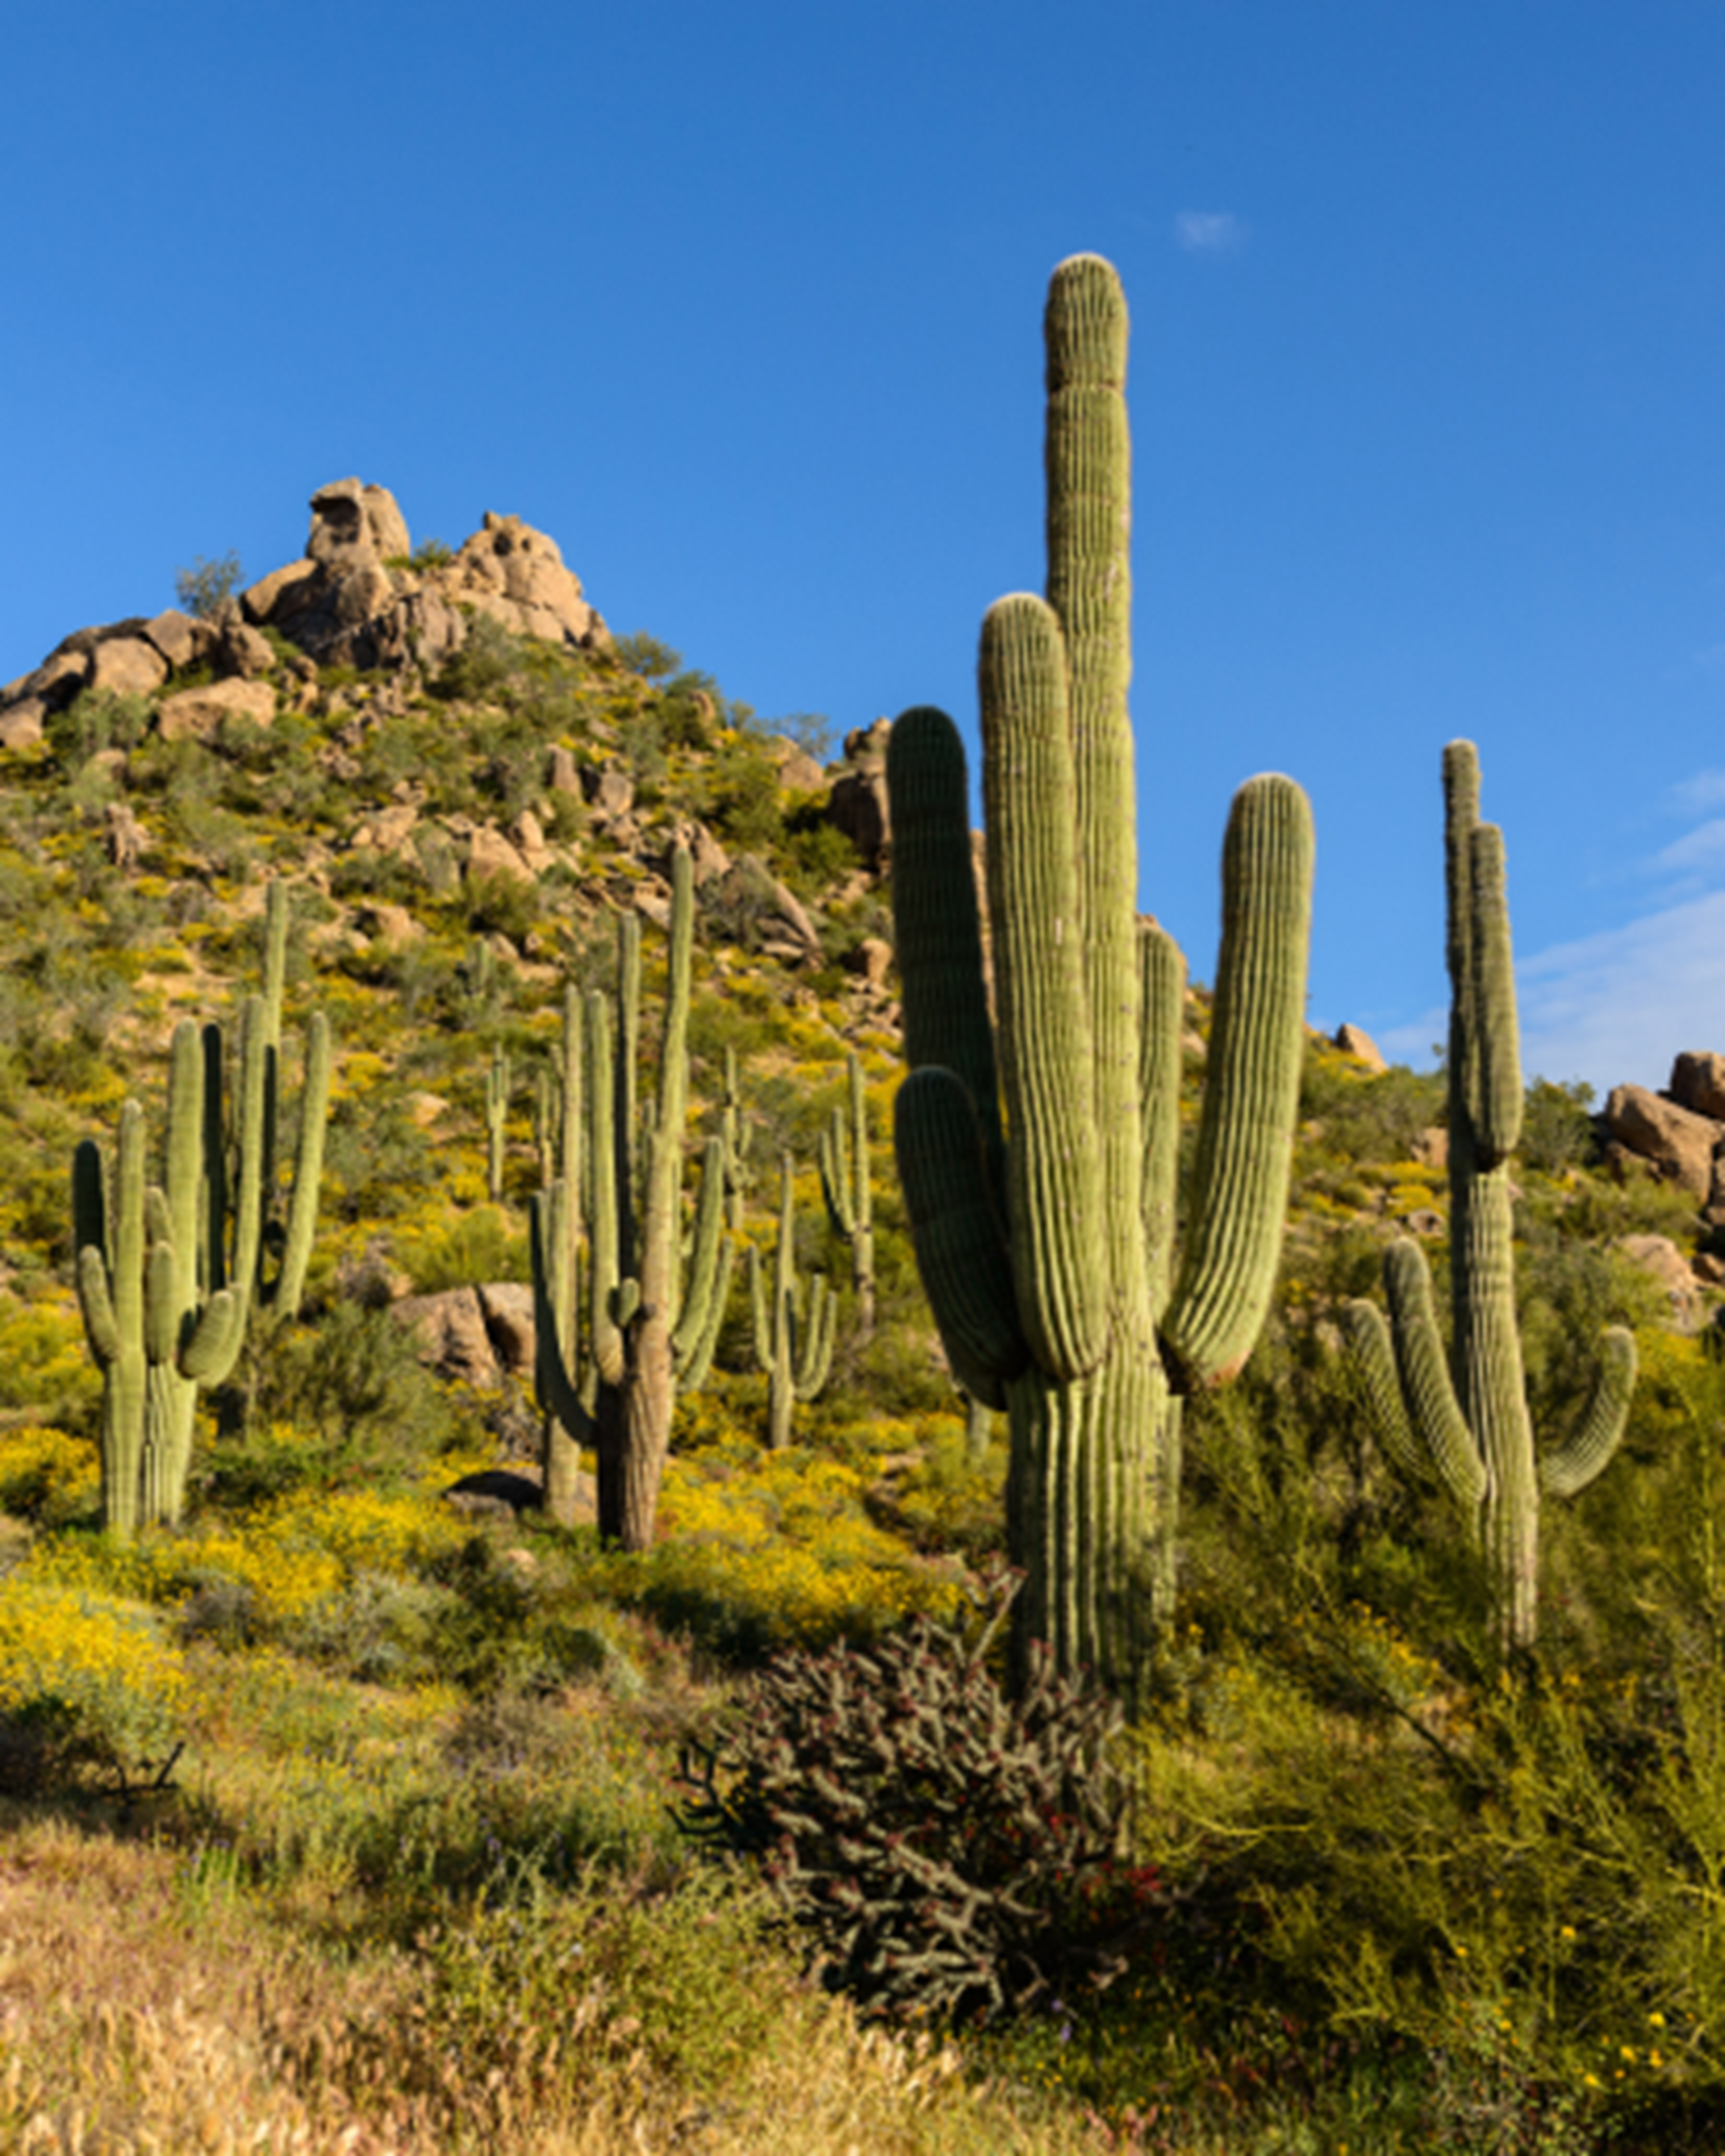 Cacti in the Sonoran mountains